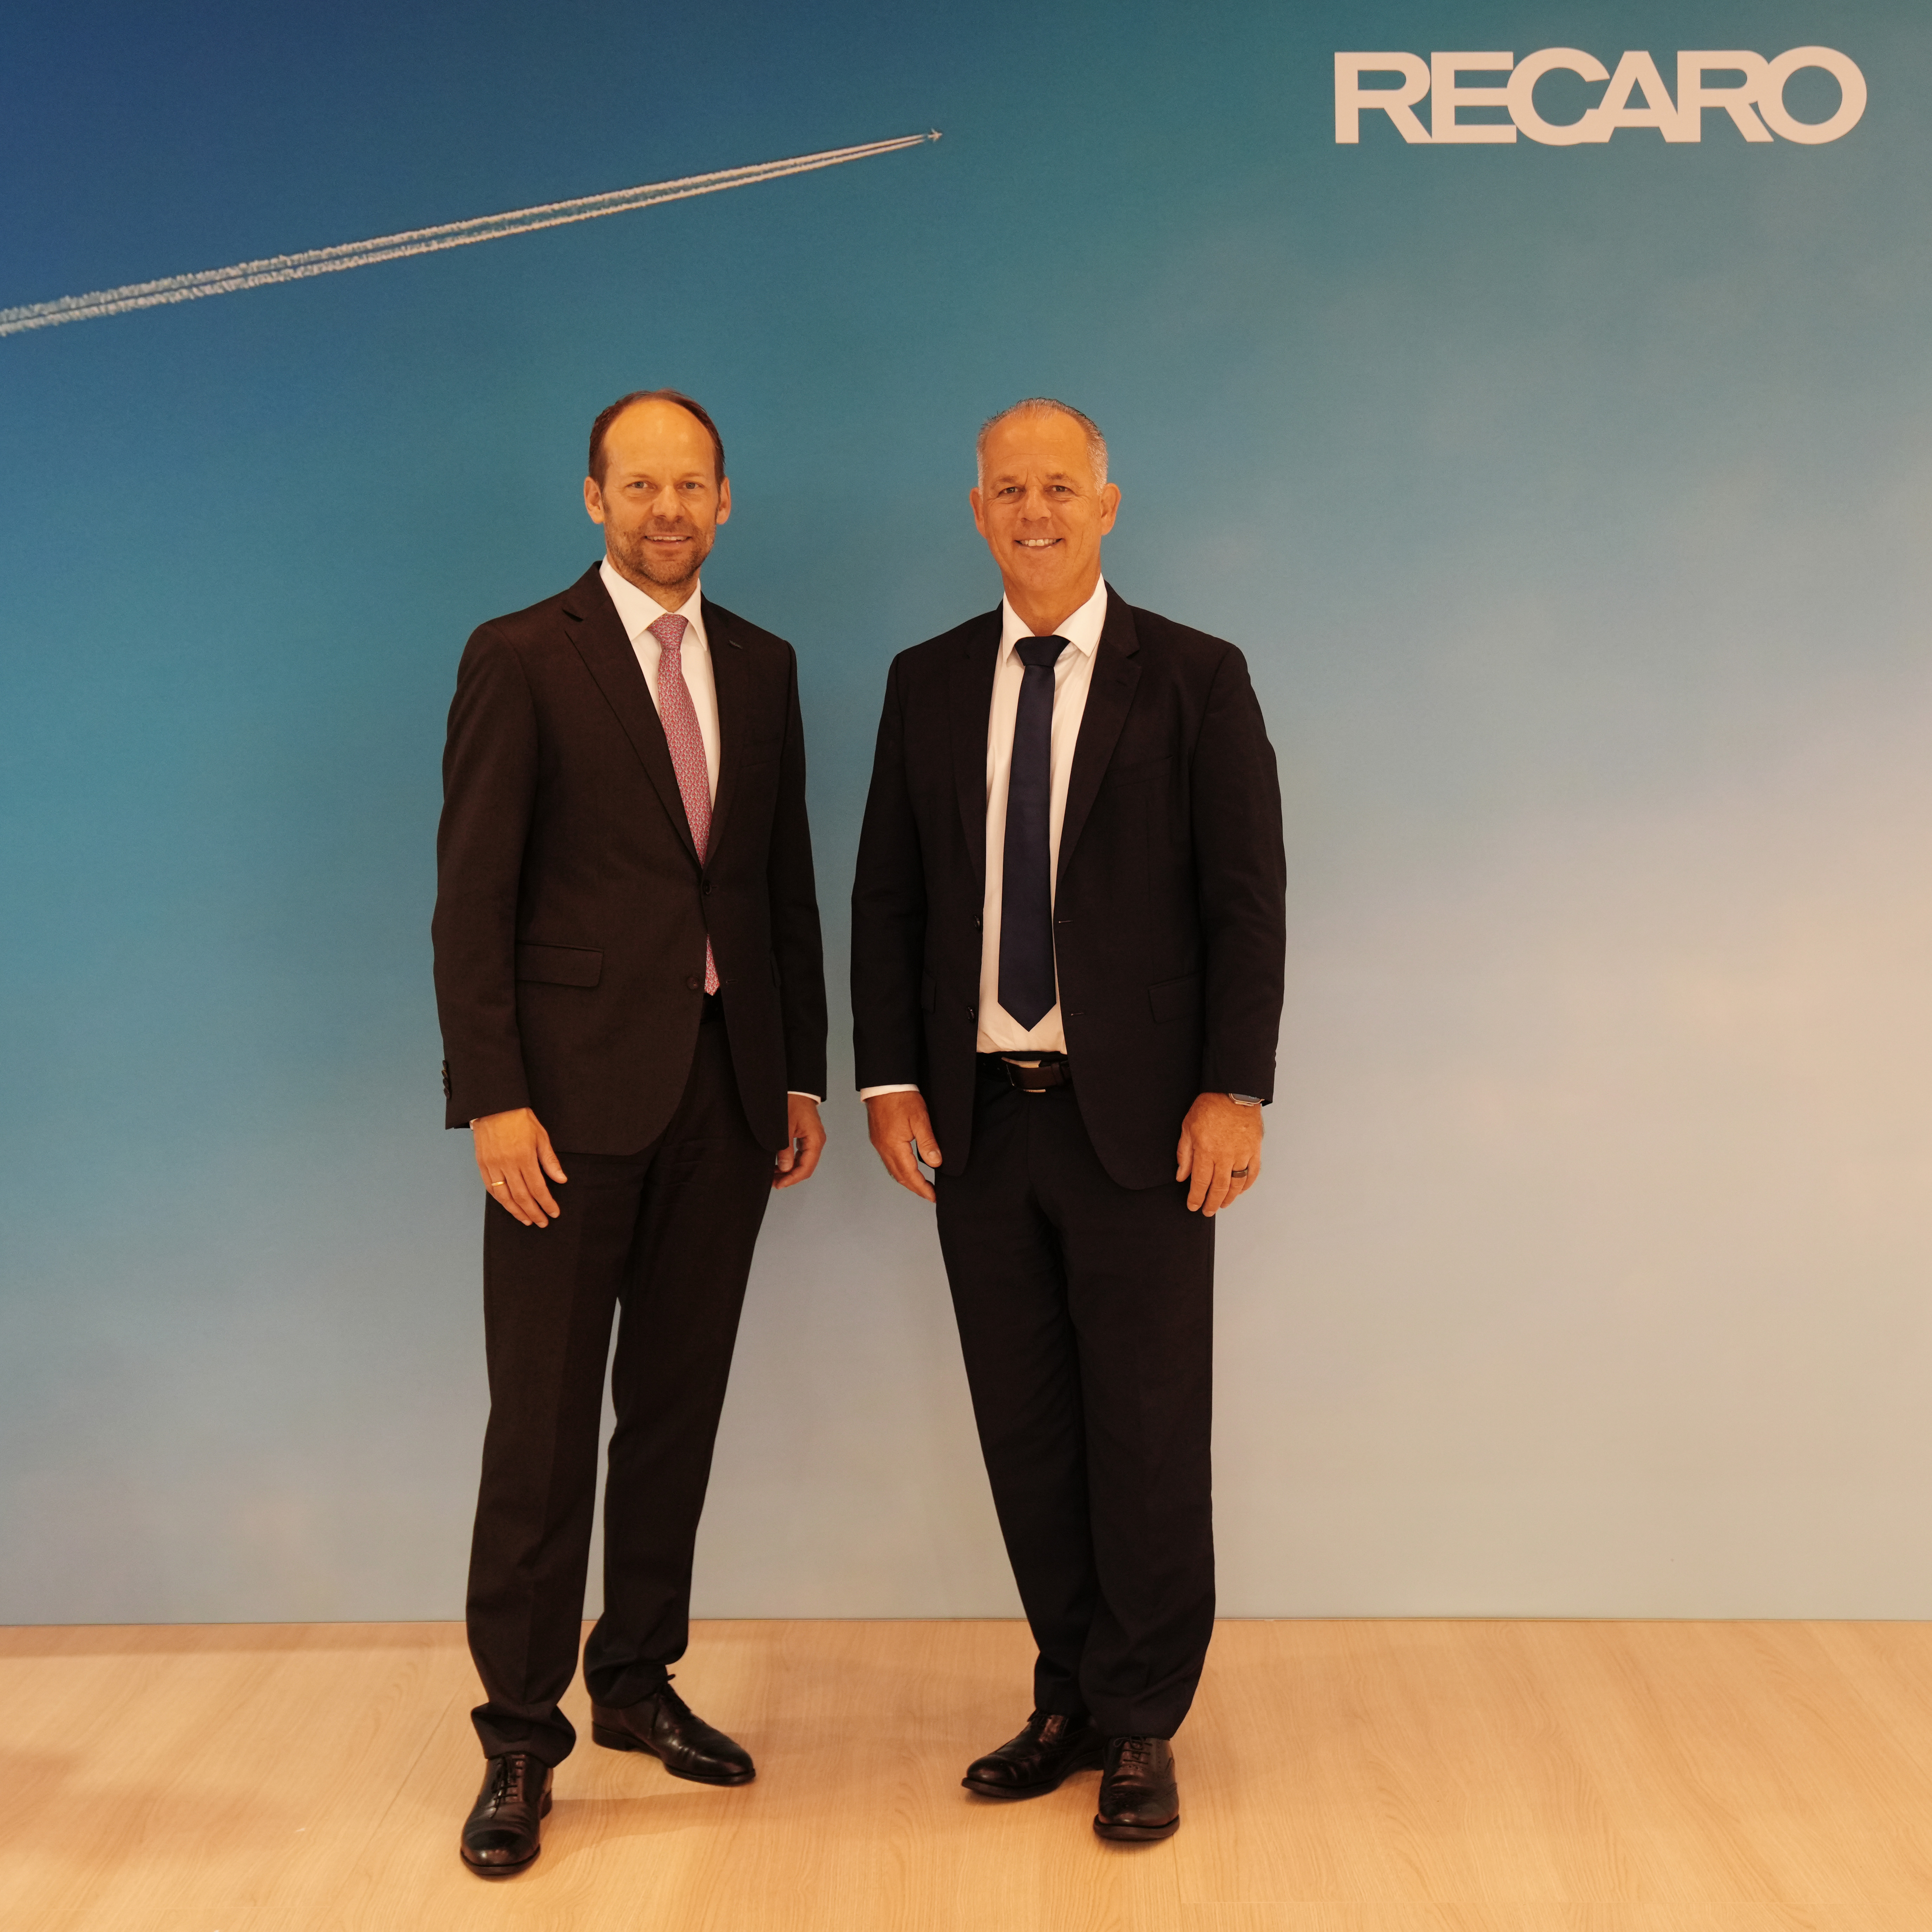 AirBaltic selects Recaro’s R2 seat for its A220-300 aircraft